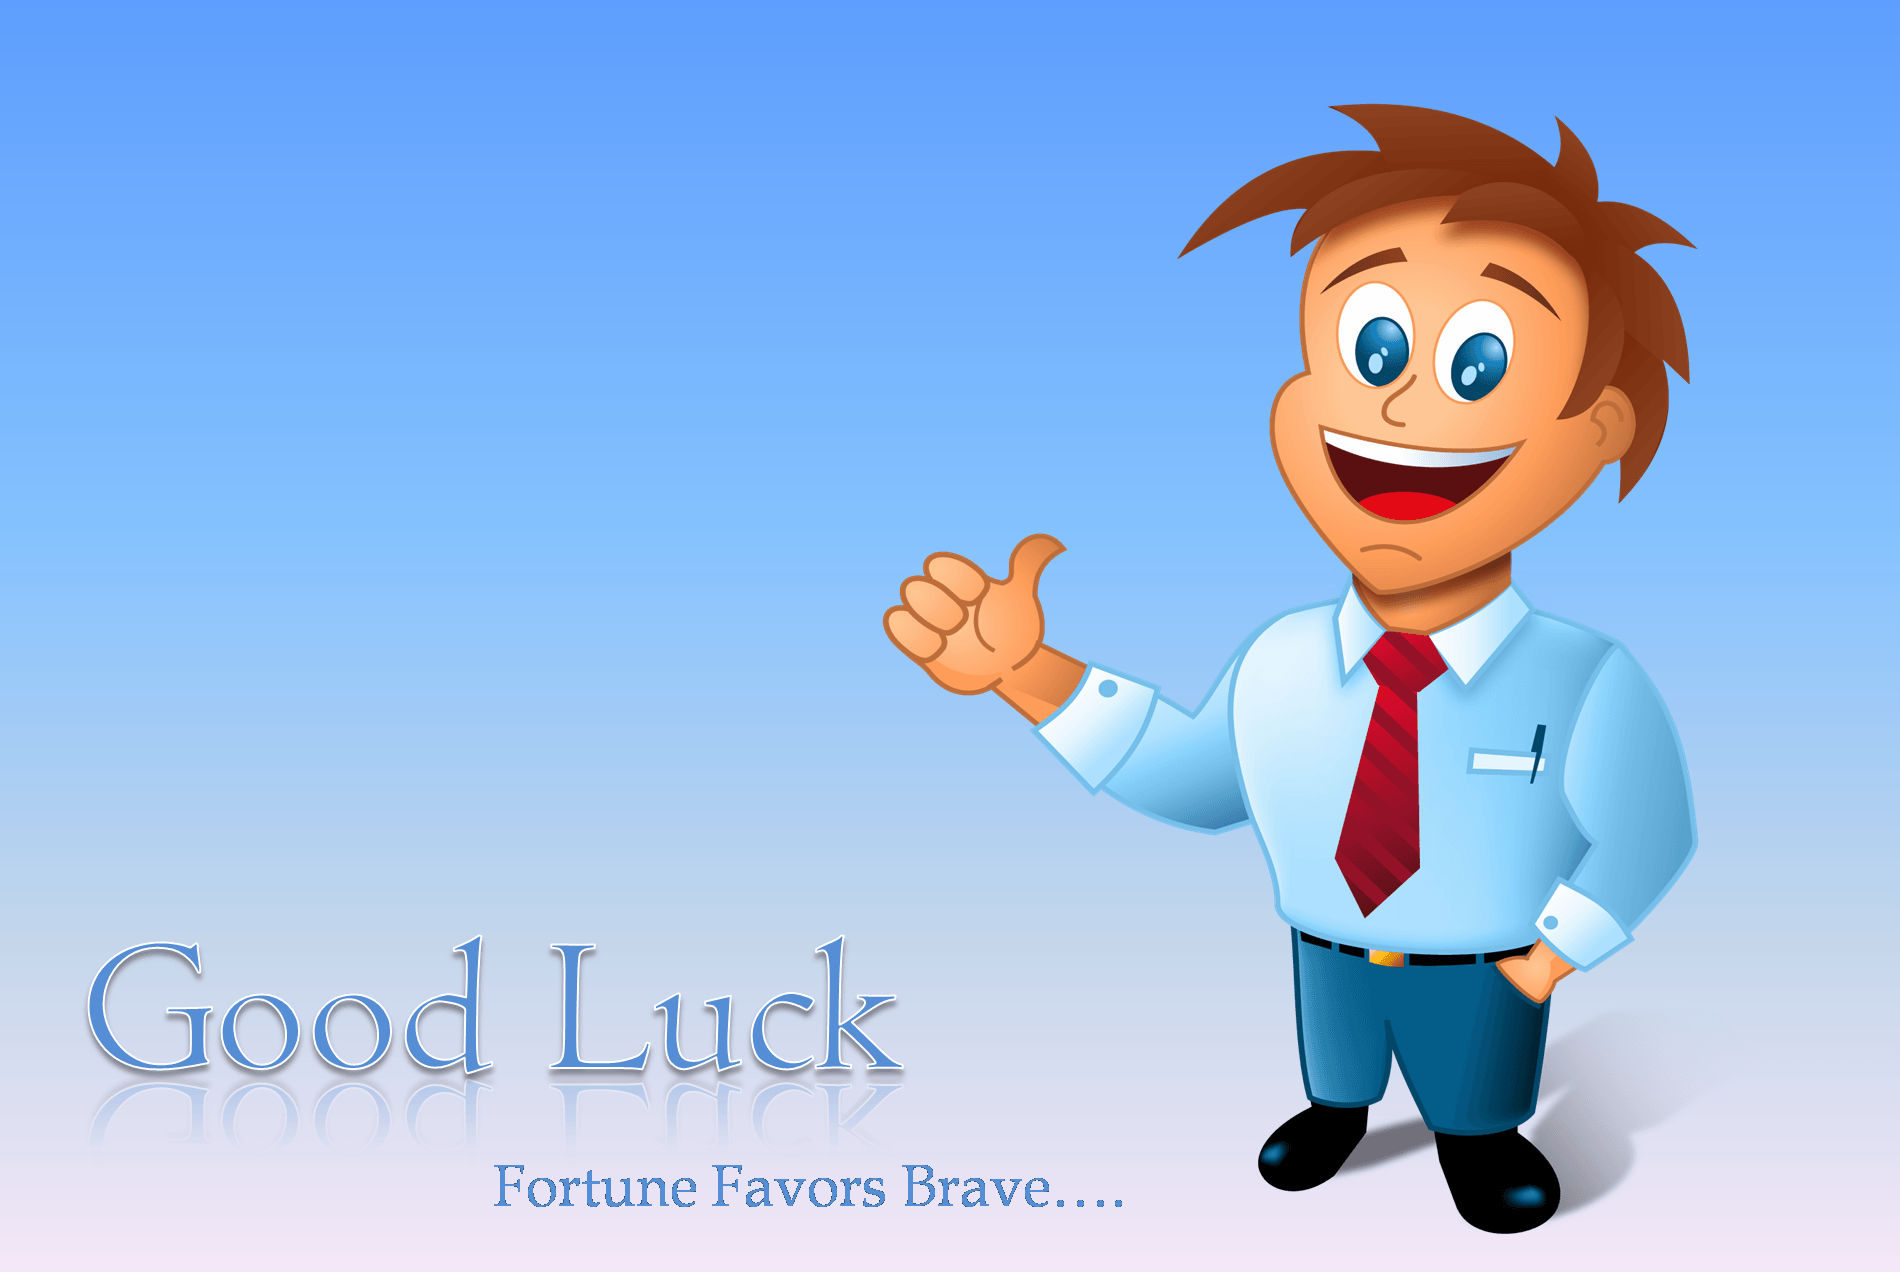 Good Luck Wishes For Future Picture and Image